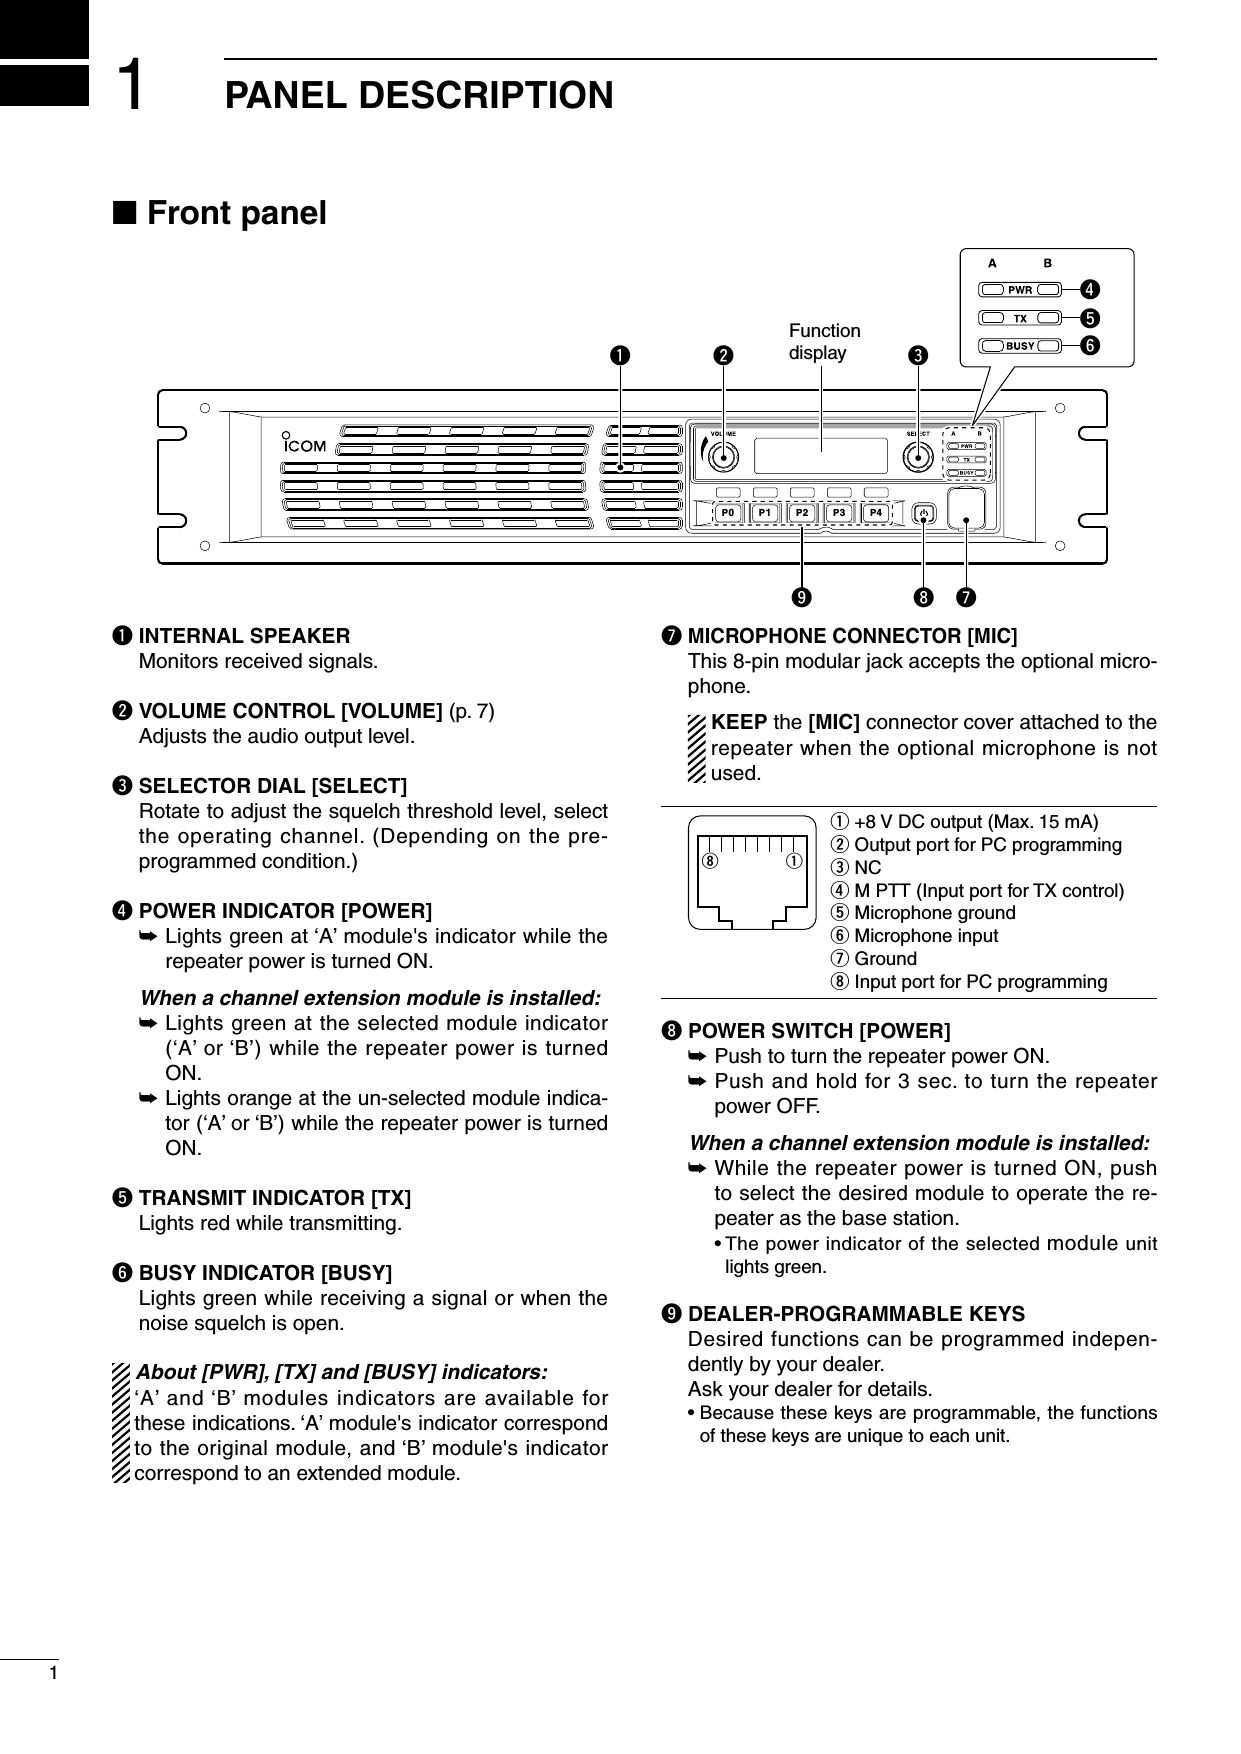 1PANEL DESCRIPTION2001 NEW1q INTERNAL SPEAKER   Monitors received signals.w VOLUME CONTROL [VOLUME] (p. 7)  Adjusts the audio output level.e SELECTOR DIAL [SELECT]   Rotate to adjust the squelch threshold level, select the operating channel. (Depending on the pre-programmed condition.)r POWER INDICATOR [POWER] ➥  Lights green at ‘A’ module&apos;s indicator while the repeater power is turned ON.  When a channel extension module is installed: ➥  Lights green at the selected module indicator (‘A’ or ‘B’) while the repeater power is turned ON. ➥  Lights orange at the un-selected module indica-tor (‘A’ or ‘B’) while the repeater power is turned ON.t TRANSMIT INDICATOR [TX]   Lights red while transmitting.y BUSY INDICATOR [BUSY]   Lights green while receiving a signal or when the noise squelch is open.  About [PWR], [TX] and [BUSY] indicators:  ‘A’ and ‘B’ modules indicators are available for these indications. ‘A’ module&apos;s indicator correspond to the original module, and ‘B’ module&apos;s indicator correspond to an extended module.u MICROPHONE CONNECTOR [MIC]   This 8-pin modular jack accepts the optional micro-phone.      KEEP the [MIC] connector cover attached to the repeater when the optional microphone is not used.iqq +8 V DC output (Max. 15 mA) w Output port for PC programming e NC r M PTT (Input port for TX control) t Microphone ground y Microphone input u Ground i Input port for PC programmingi POWER SWITCH [POWER] ➥  Push to turn the repeater power ON. ➥  Push and hold for 3 sec. to turn the repeater power OFF.  When a channel extension module is installed: ➥  While the repeater power is turned ON, push to select the desired module to operate the re-peater as the base station.    •  The power indicator of the selected module unit lights green.o DEALER-PROGRAMMABLE KEYS Desired functions can be programmed indepen-dently by your dealer.    Ask your dealer for details.  •  Because these keys are programmable, the functions of these keys are unique to each unit.P0P1P2P3P4q w ei uoFunctiondisplayytrn Front panel